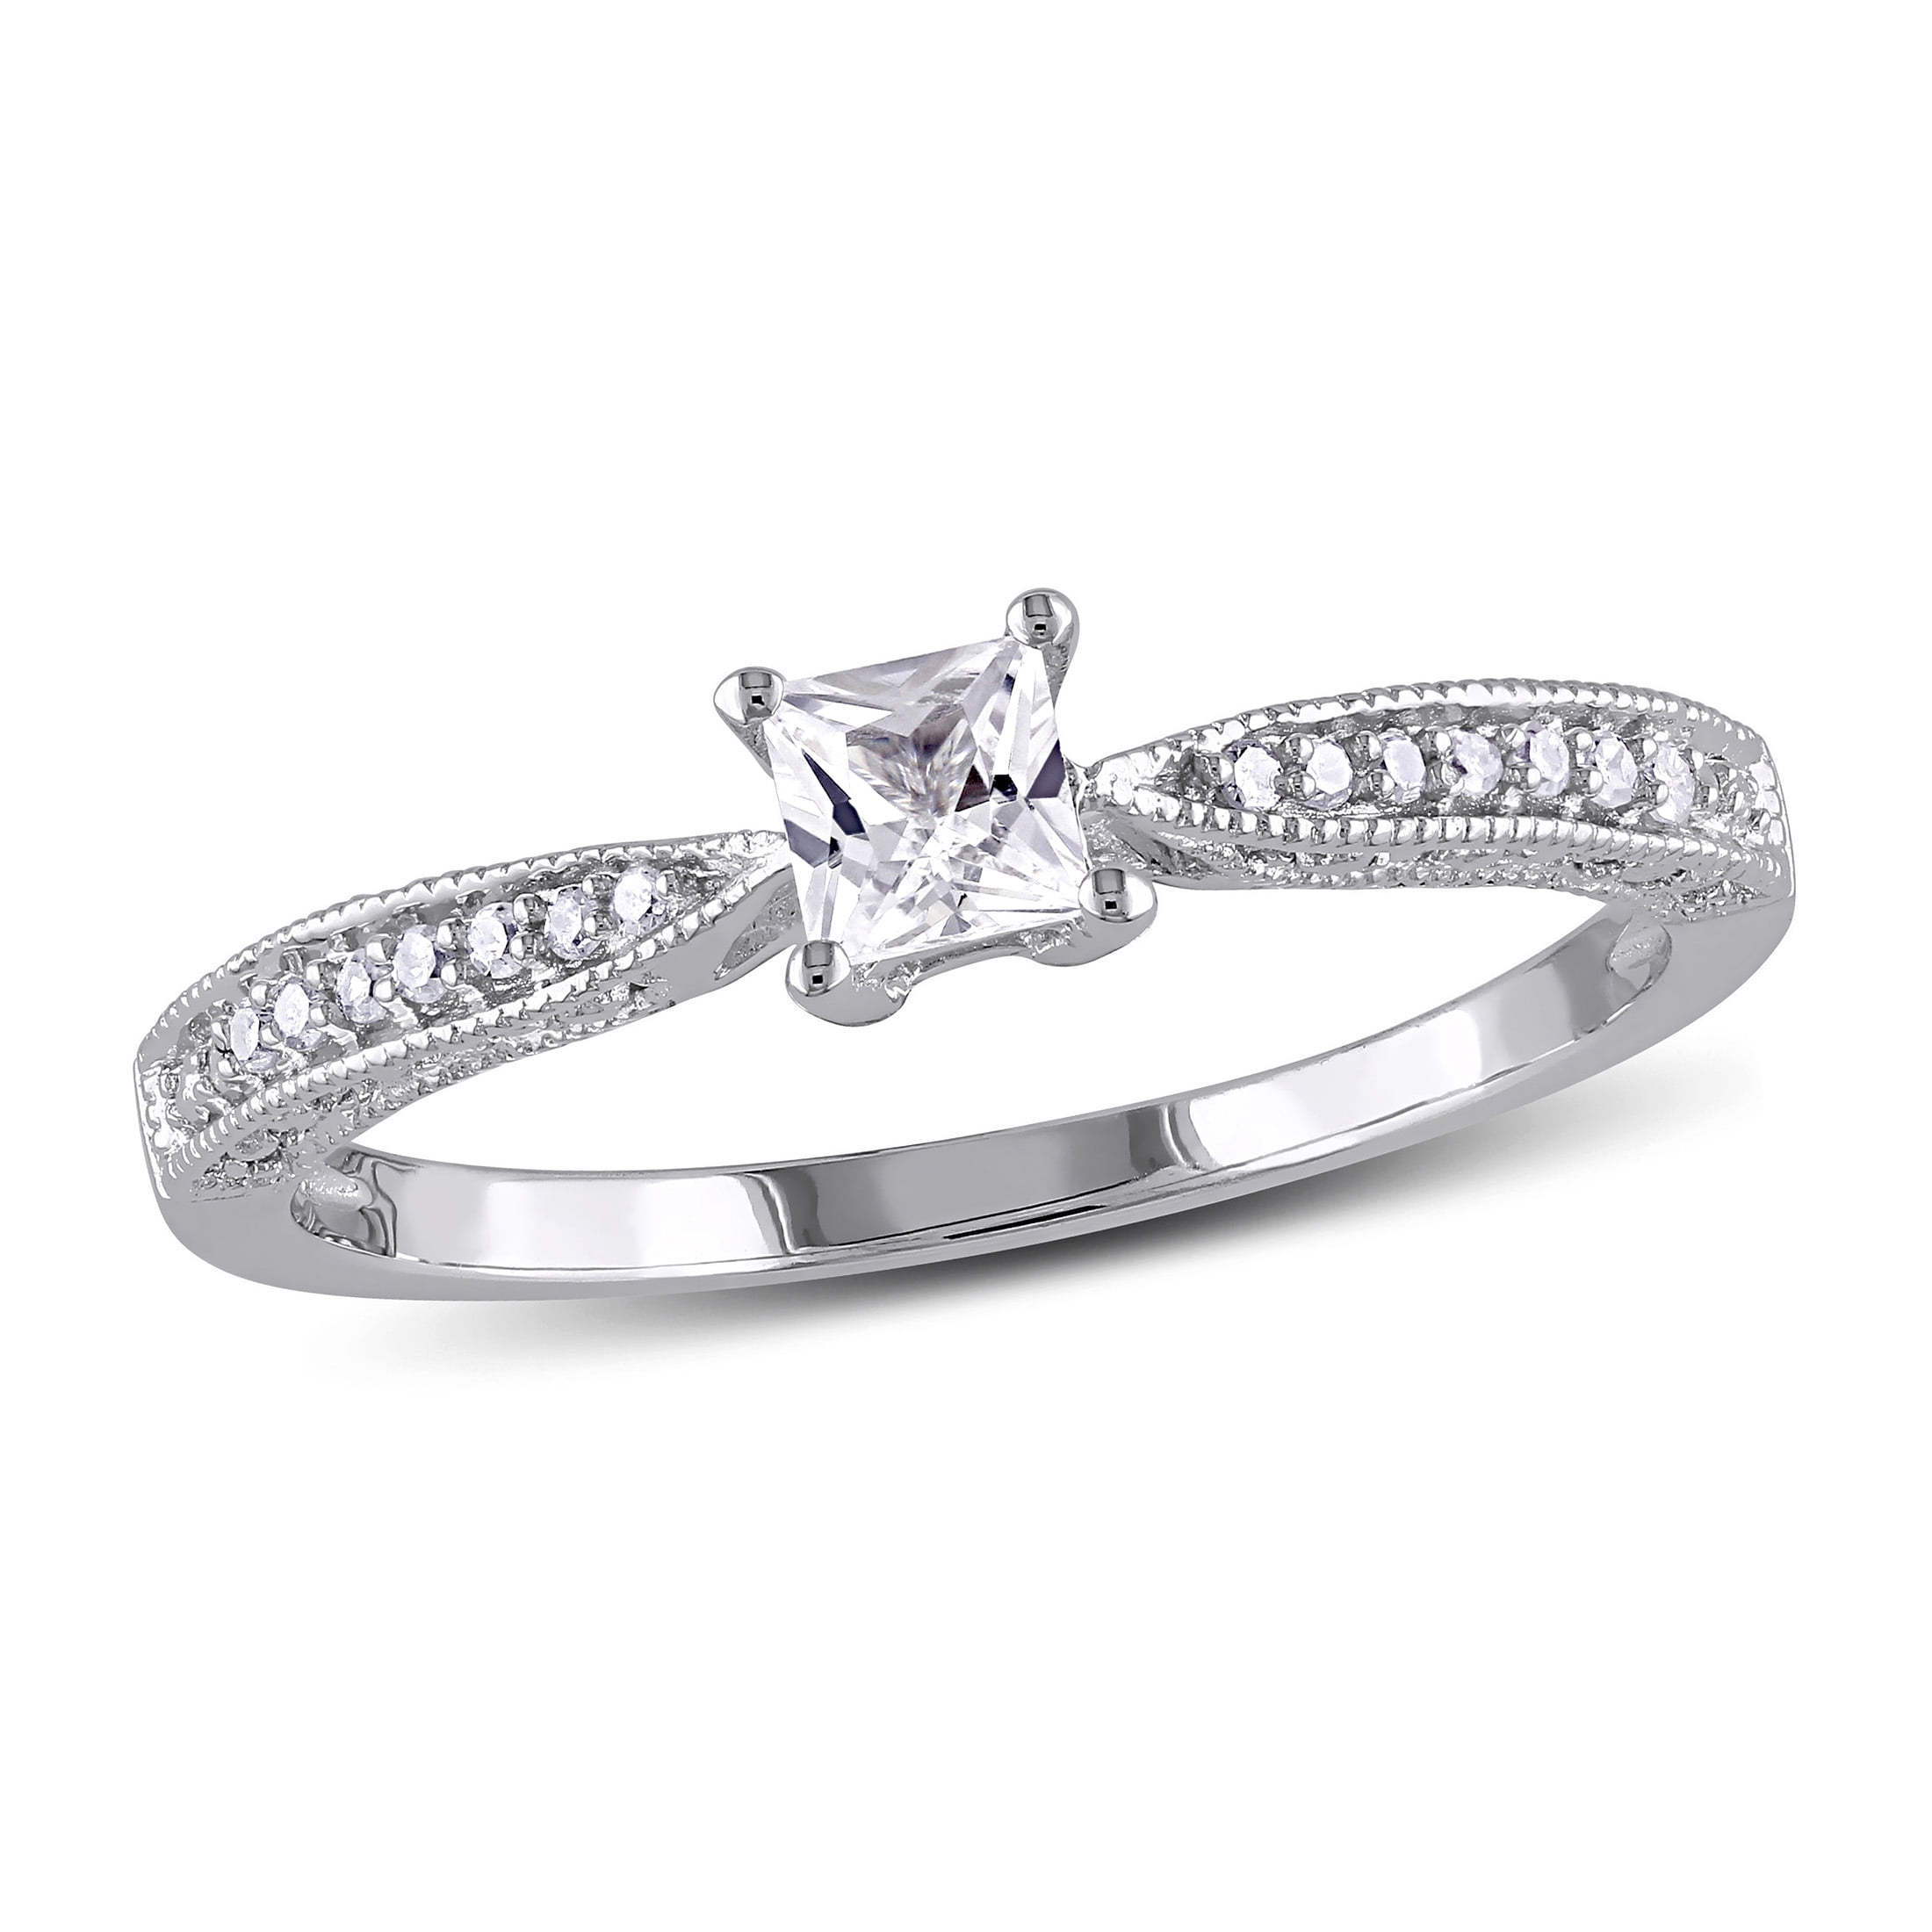 Sterling Silver Diamond Engagement Ring 1/8 in. 3.5mm wide Size 5 w/ 0.05 Carat Brilliant Cut Diamonds